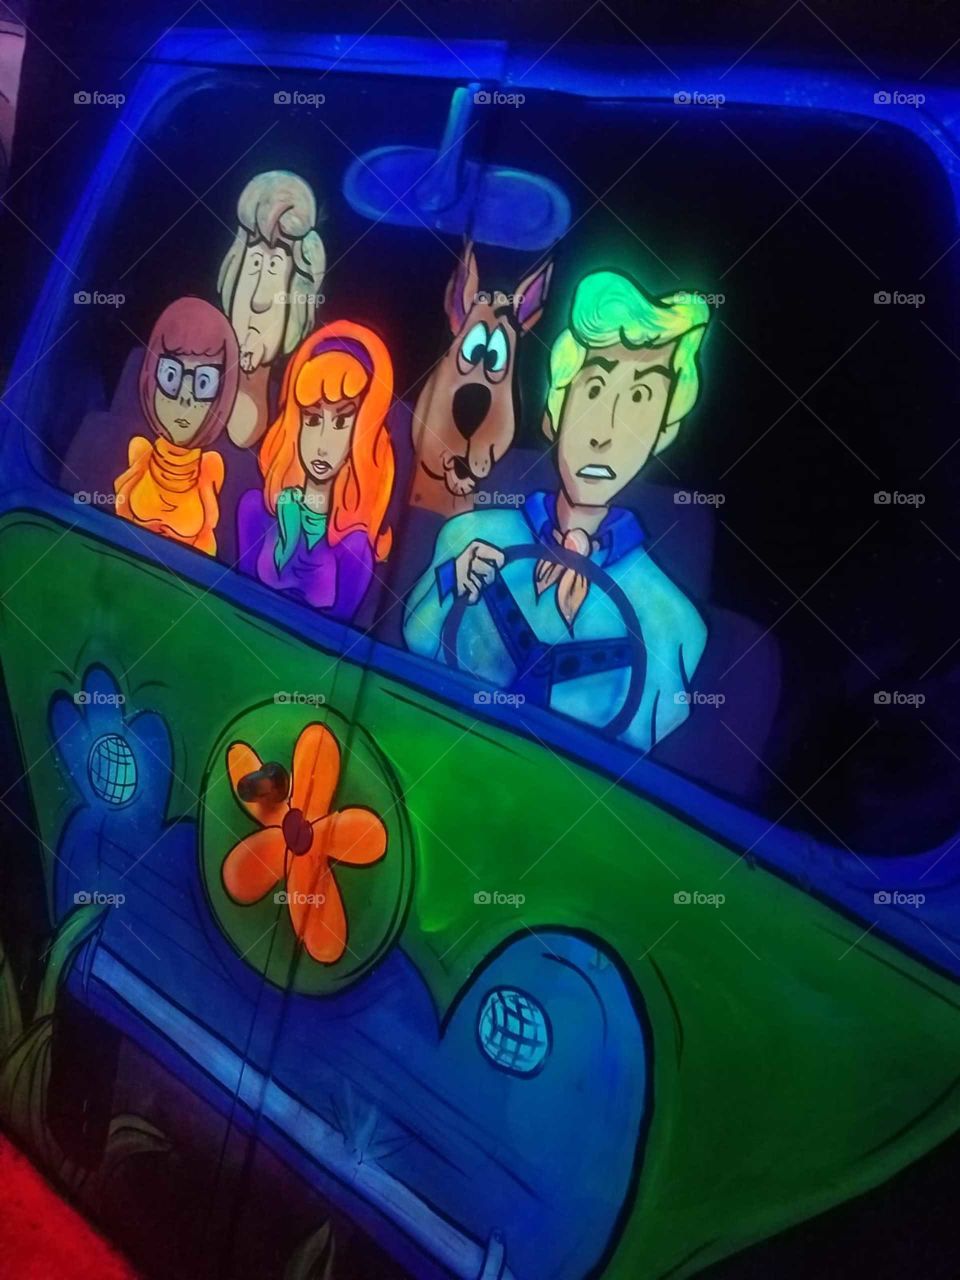 Joysticks Lounge is an amazing retro bar/arcade located in Orlando, Florida. It is bright, colorful, vivacious and has its fair share of visitors including Scooby Doo and his gang! 